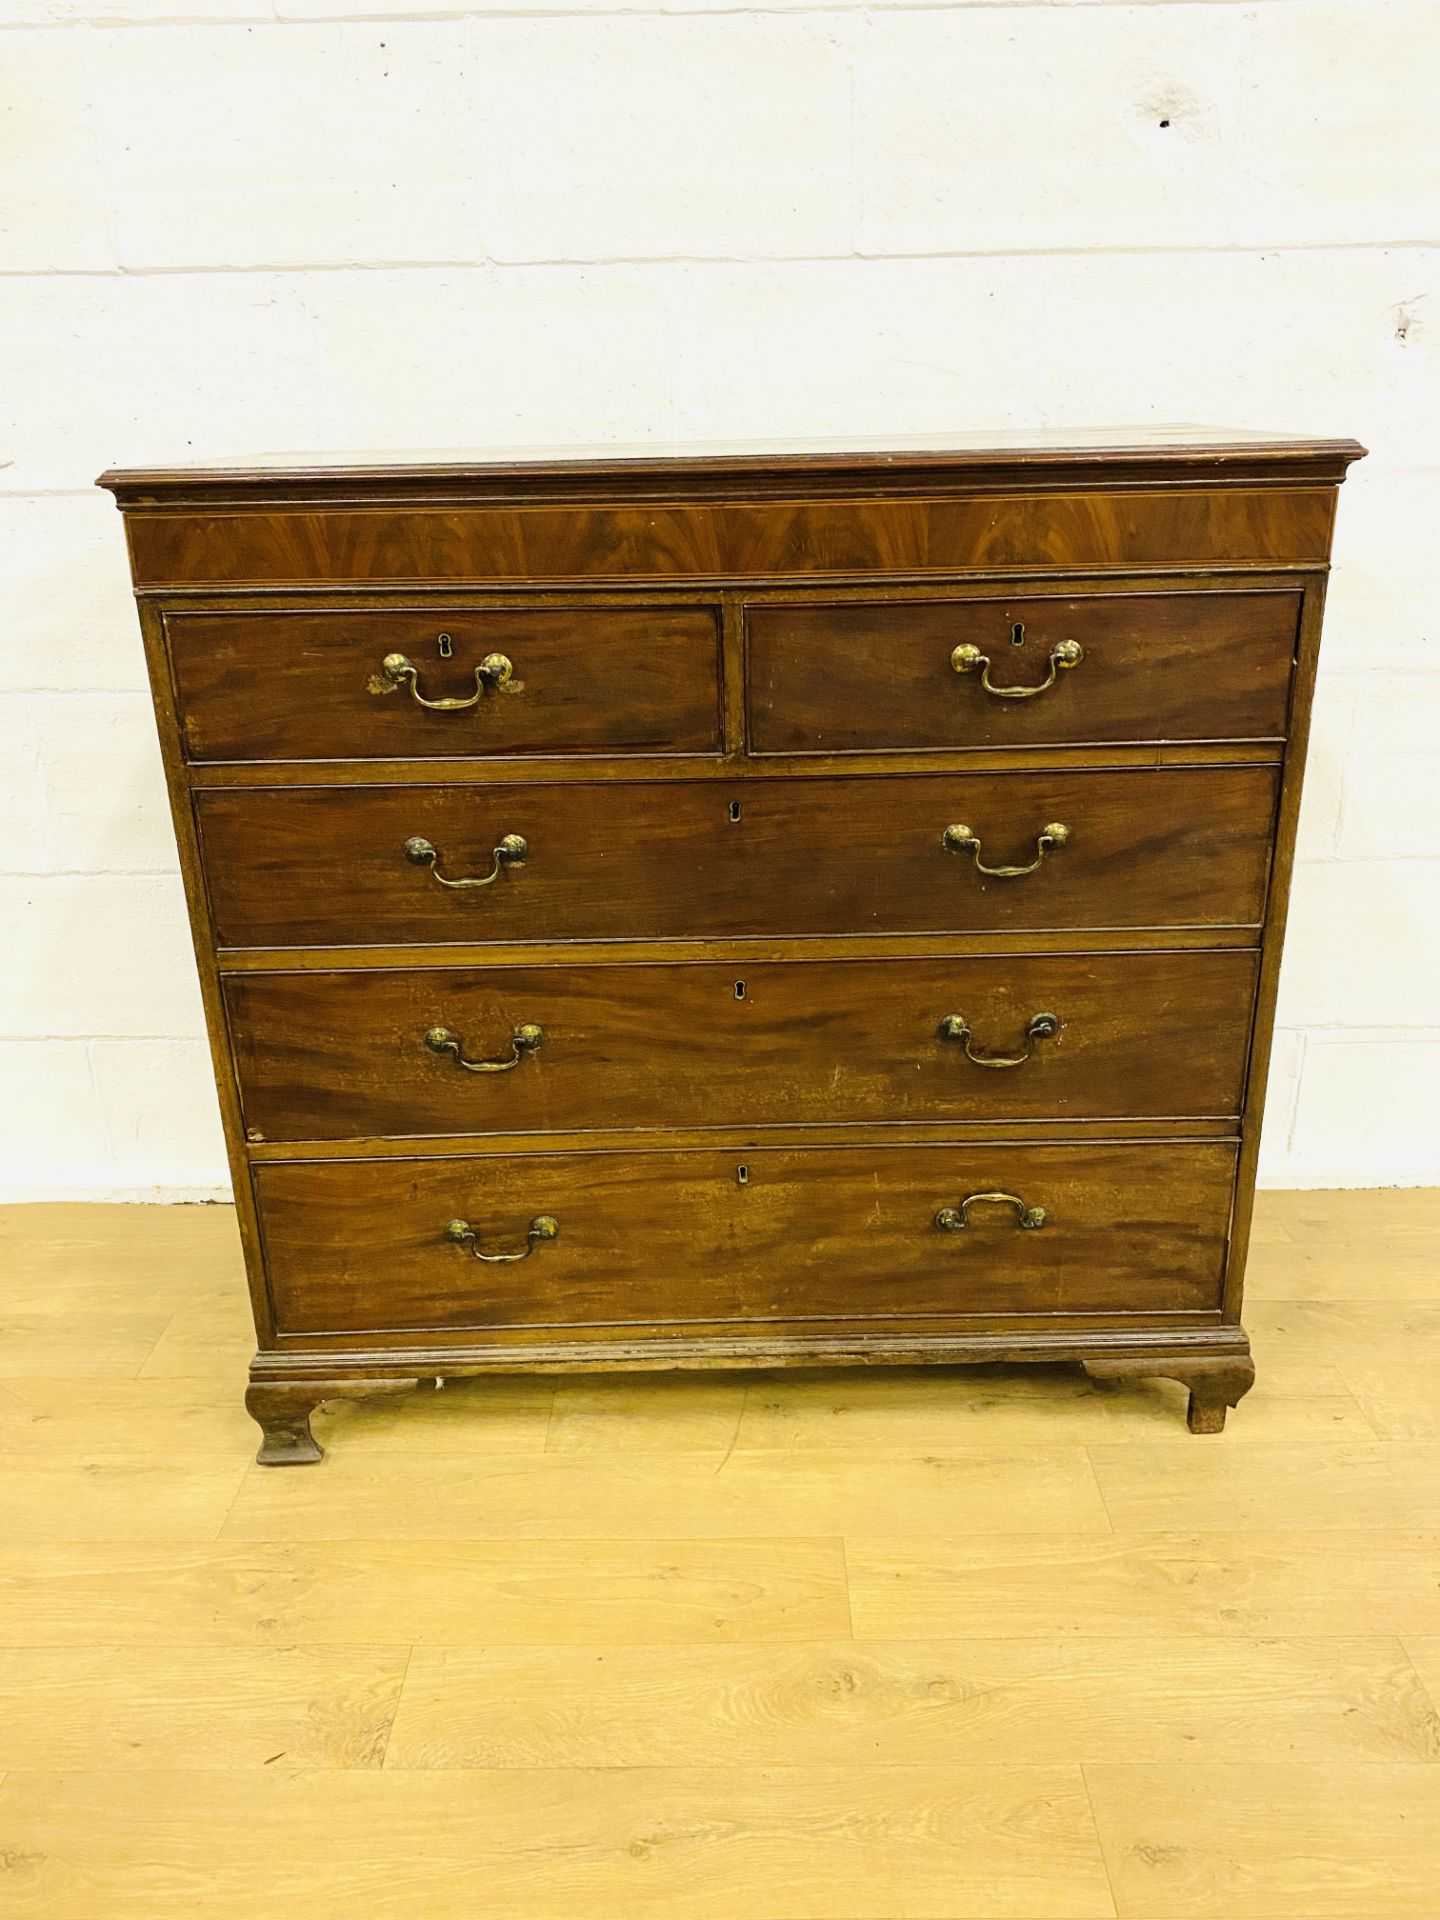 Mahogany chest of drawers - Image 3 of 7